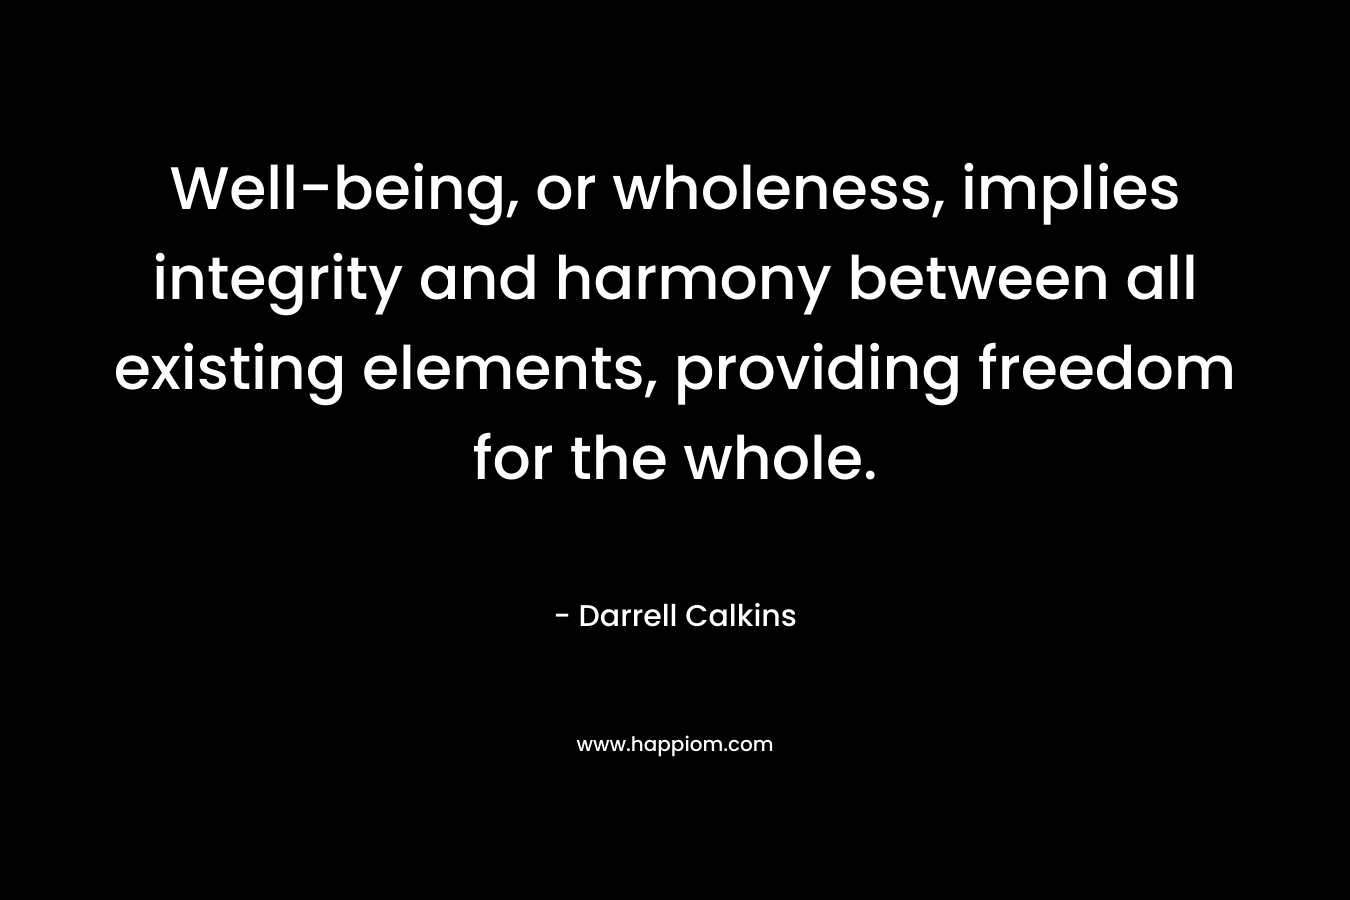 Well-being, or wholeness, implies integrity and harmony between all existing elements, providing freedom for the whole.